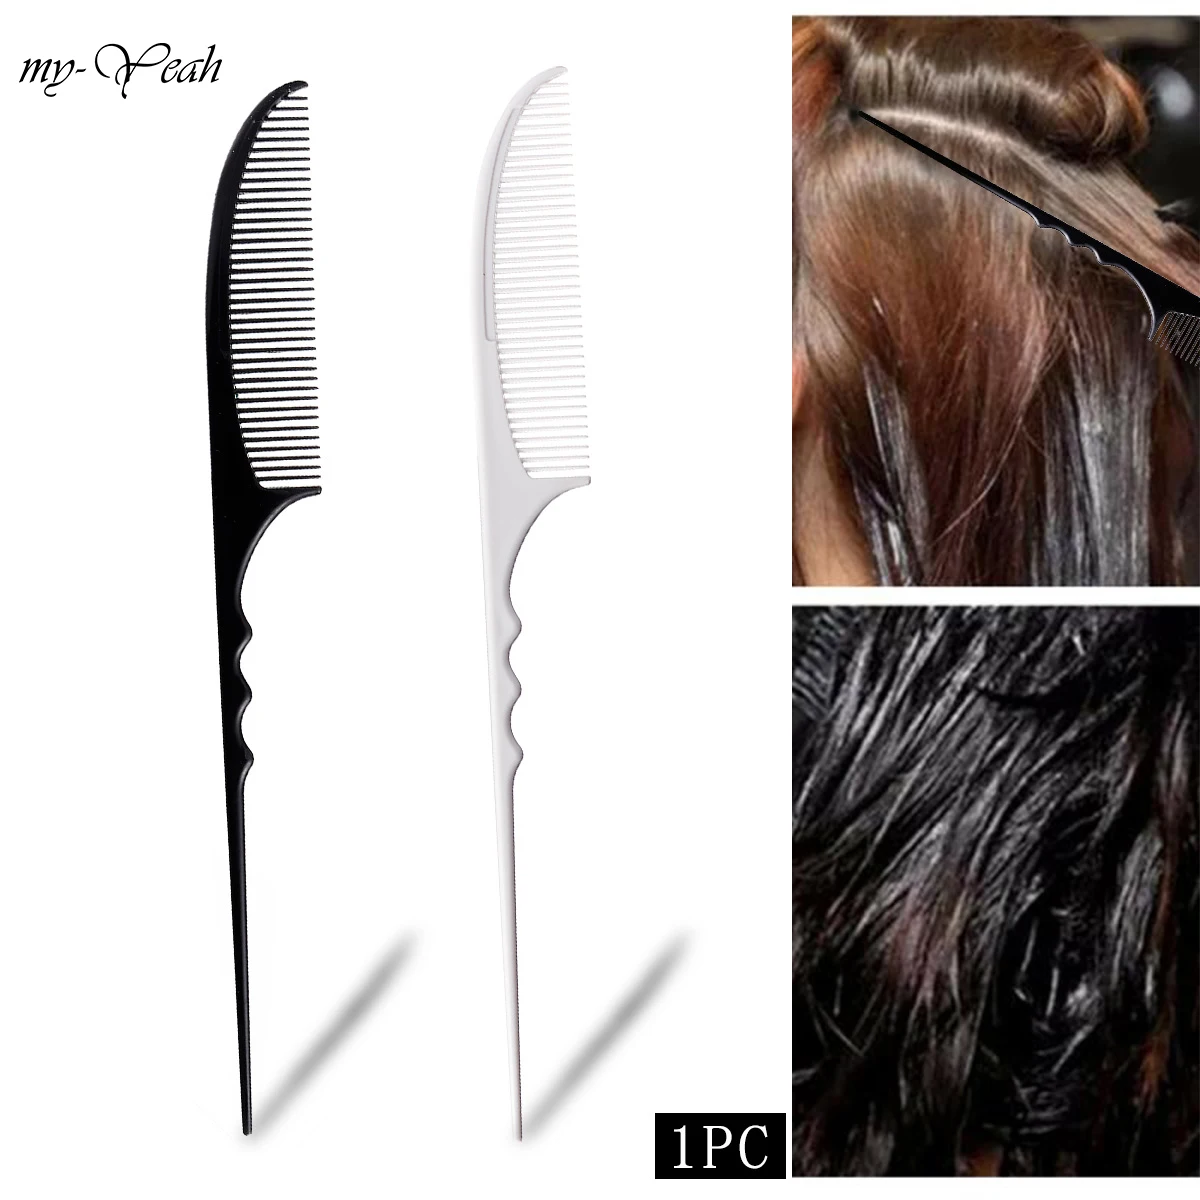 

1PC Barber Anti-Static Hair Comb Hairstyling Rat Tail Hairbrush Moon Style Comb Salon Dyeing Haircutting Hairdressing Tools